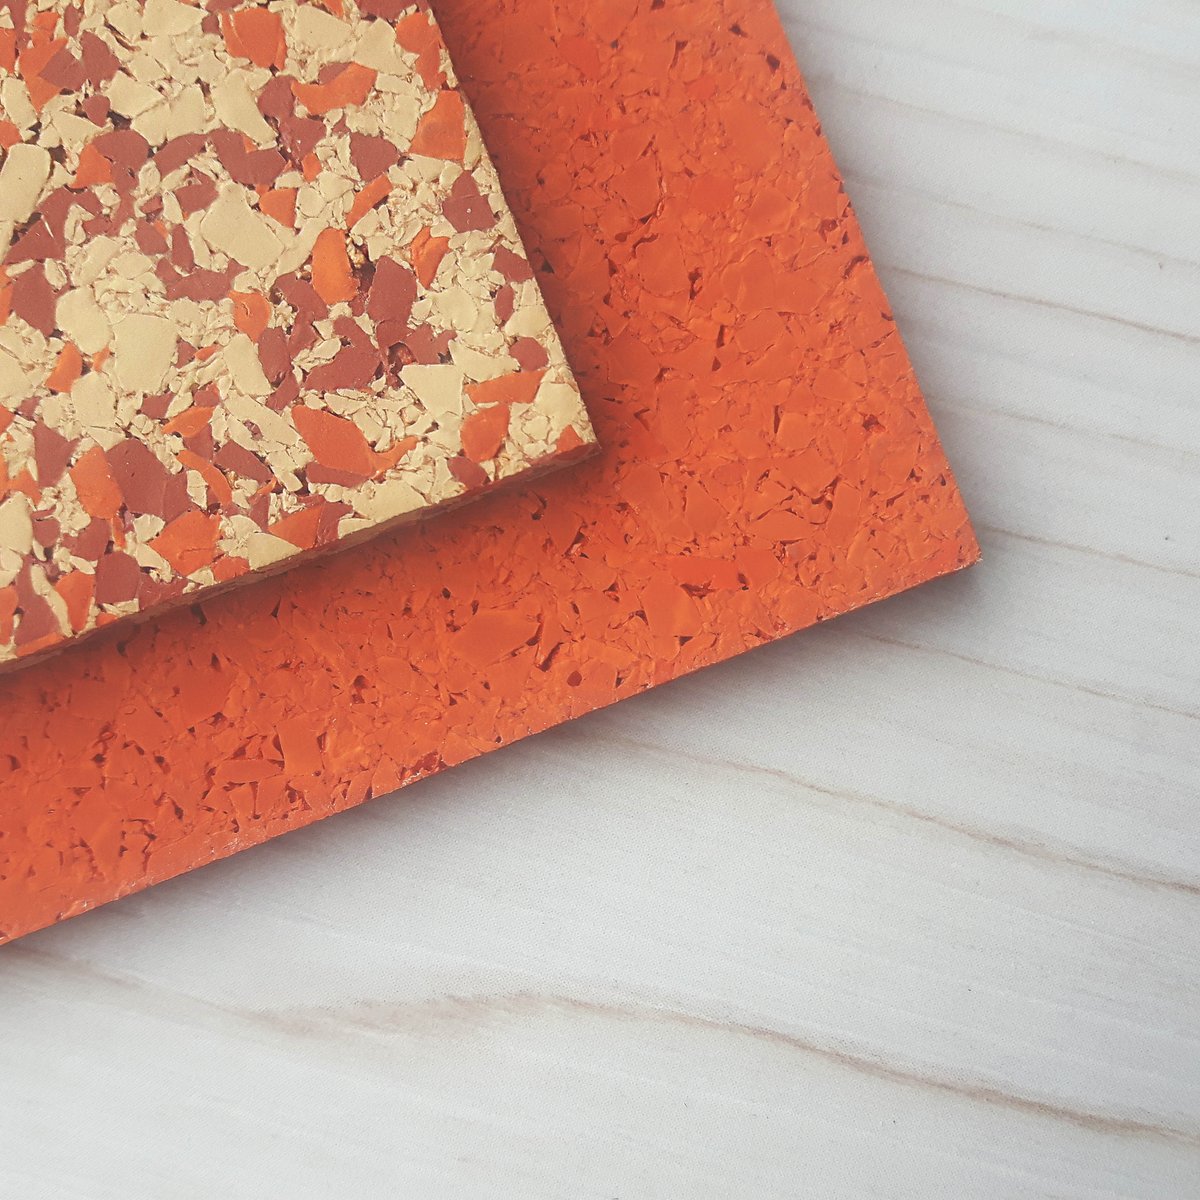 Bring the heat with a bold and vibrant scheme. | Featured Color: Hot Salsa. 

#materiallove #materials #moodboard #inspiration #sustainabledesign#materialtrends #designinspiration #colorinspo #interiordesign #commercialflooring #textiles #dinoflex #rubberflooring